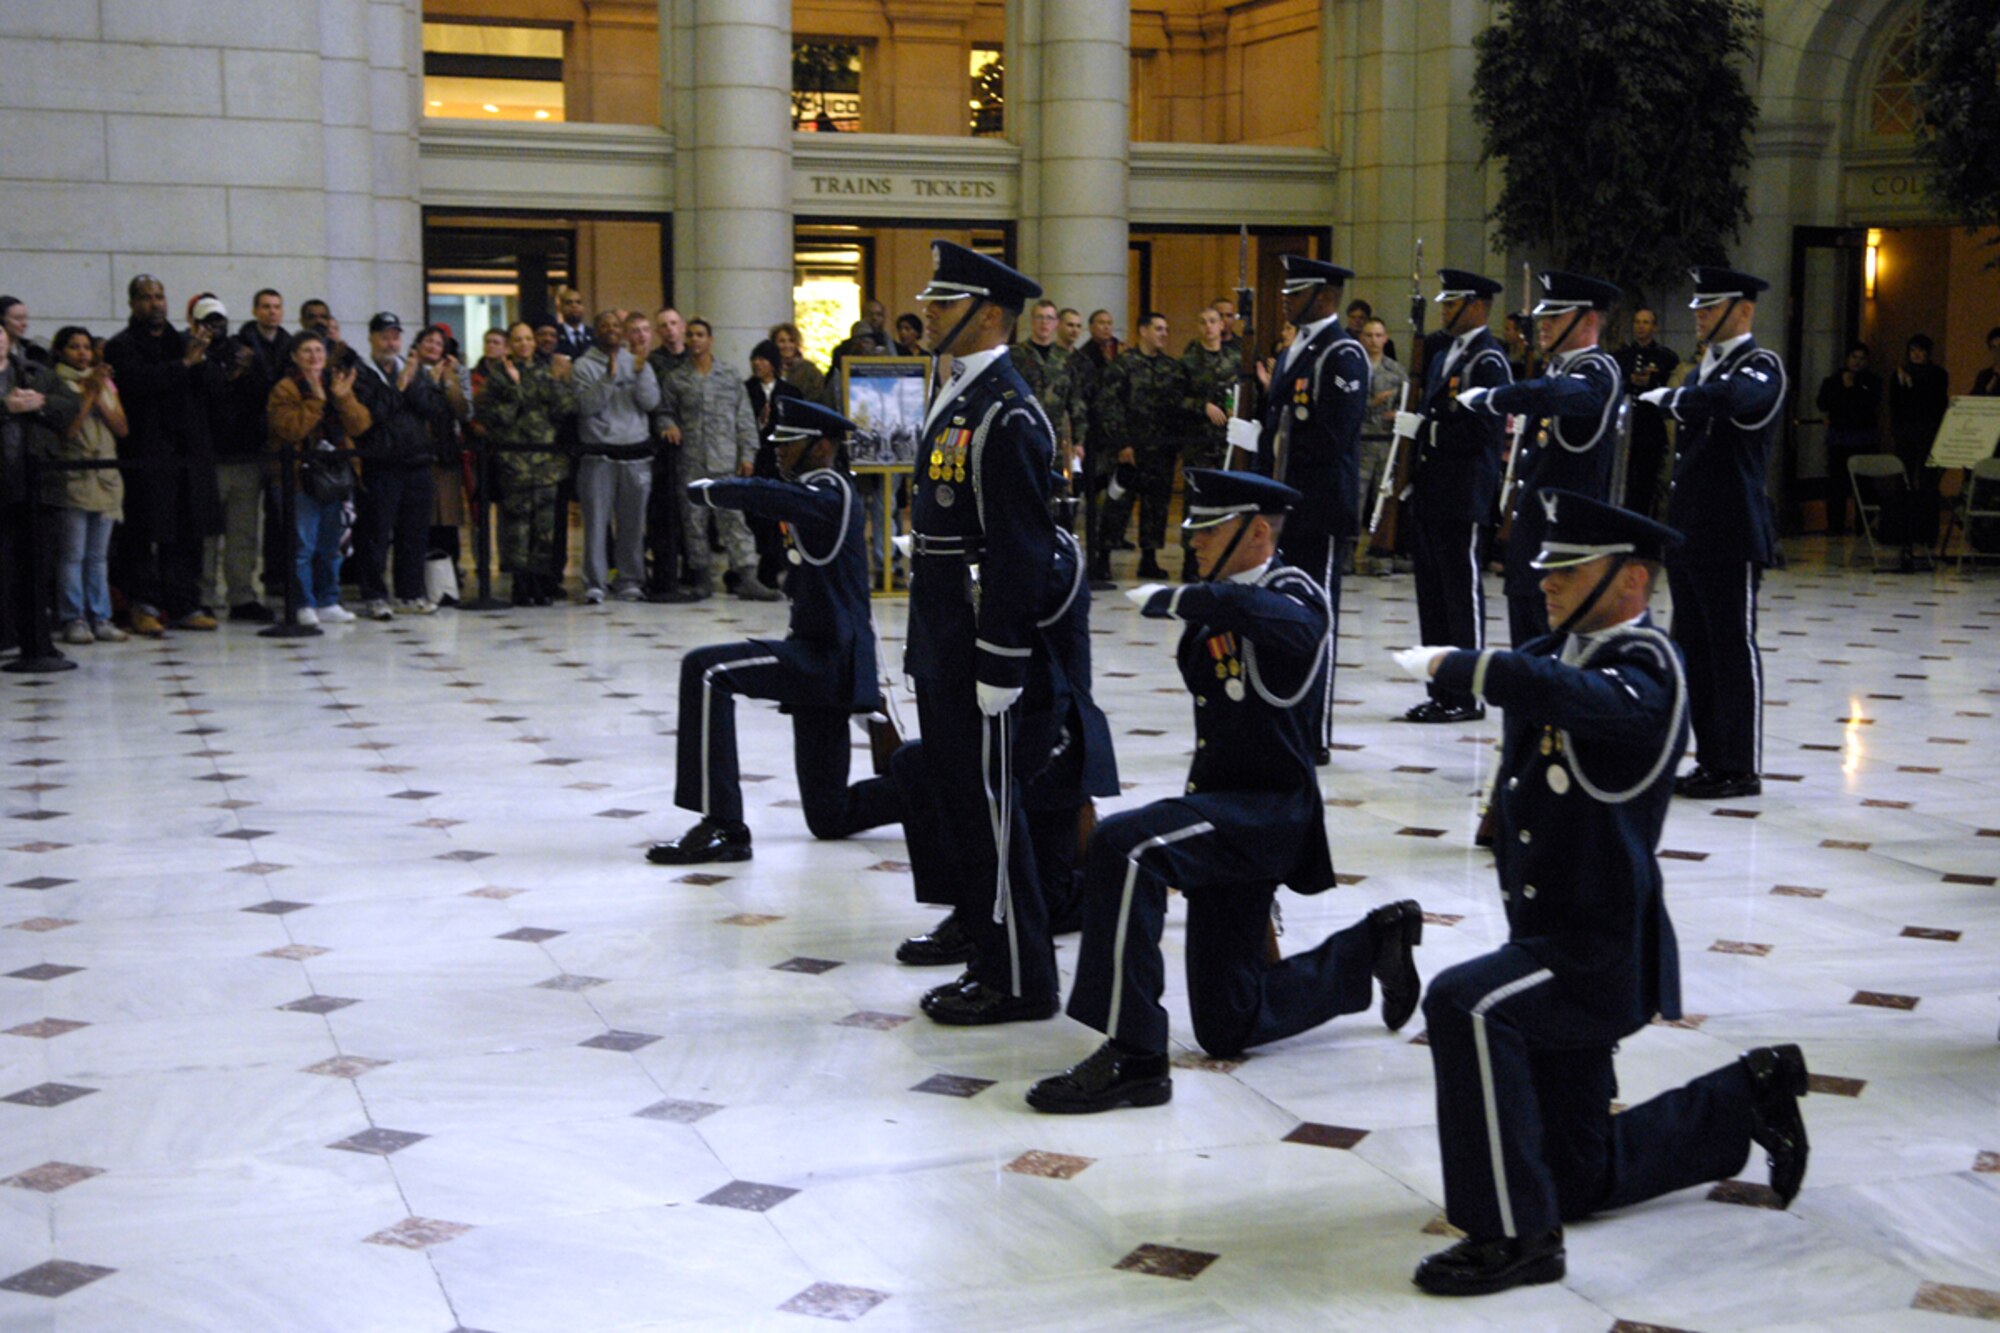 WASHINGTON, DC--The Drill Team shows-off their new drill sequence during their unveiling performance at Union Station in Washington, DC. The unveiling drill is the first drill of the year and the formal presentation of the 2008 team to AF leadership and the general public. The Drill Team is the traveling component of the Air Force Honor Guard and tours Air Force bases world wide showcasing the precision of today's Air Force to recruit, retain, and inspire Airmen for the Air Force mission. (U.S. Air Force photo by Senior Airman Sean Adams)(Released)